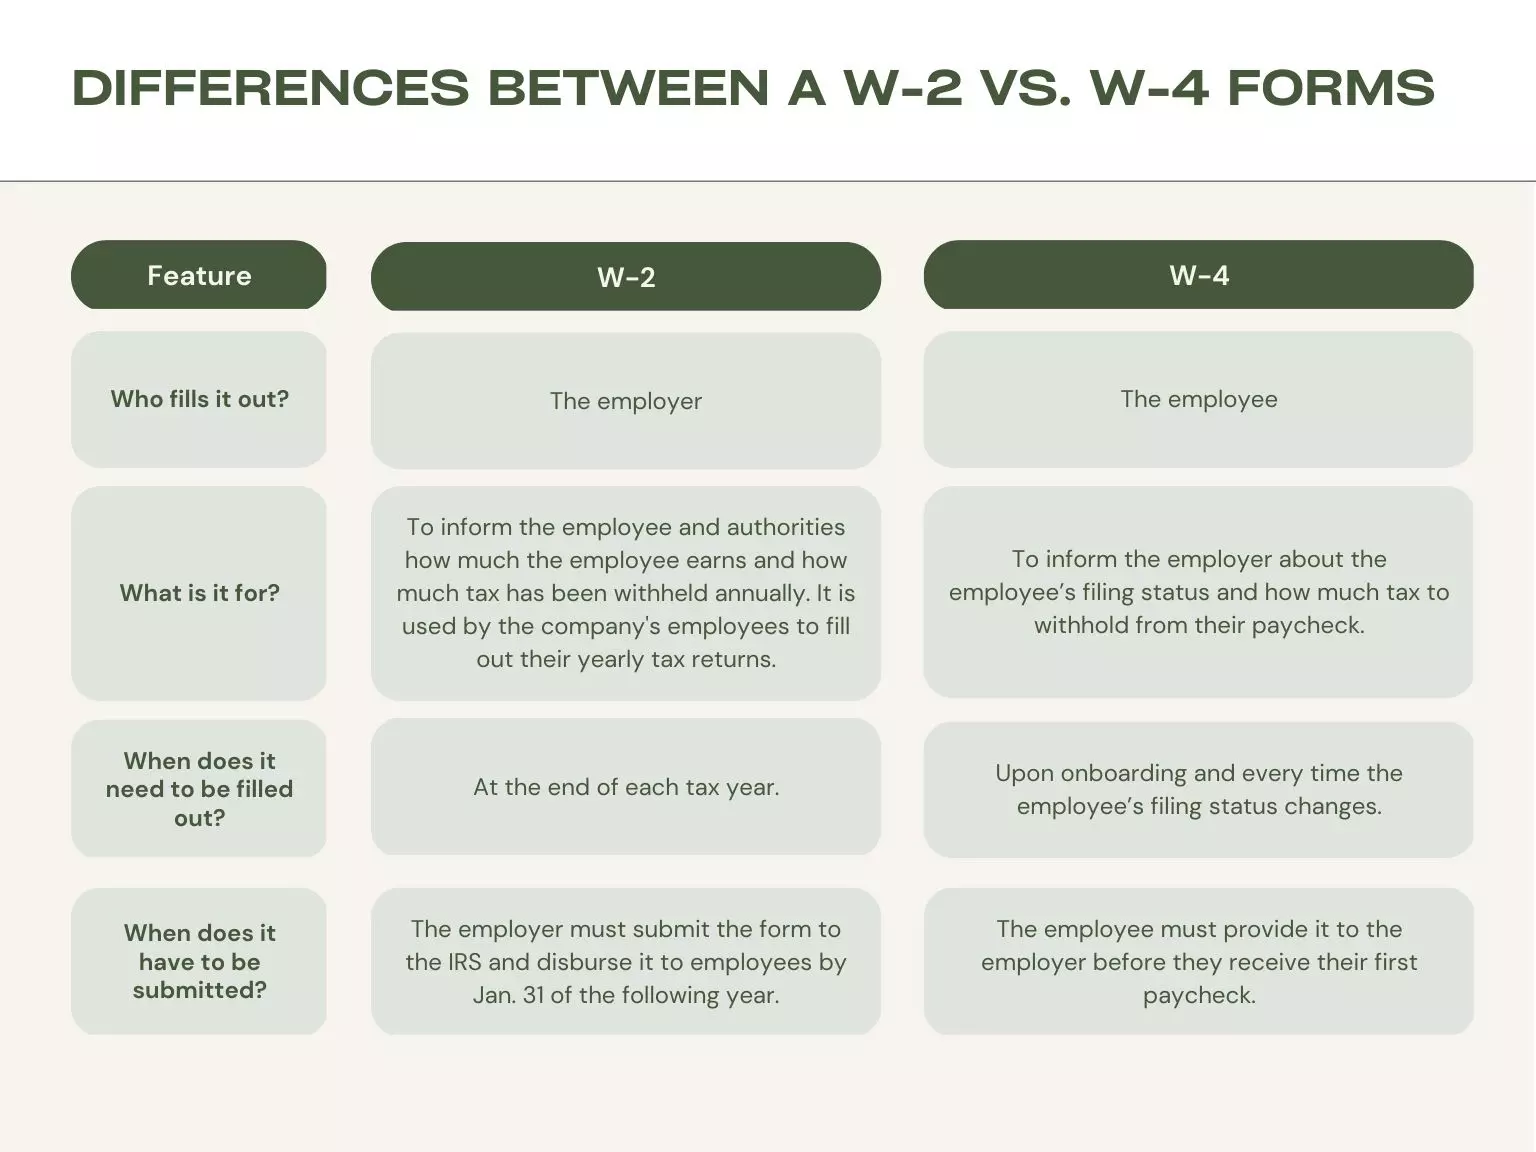 Difference between W-2 vs. W-4